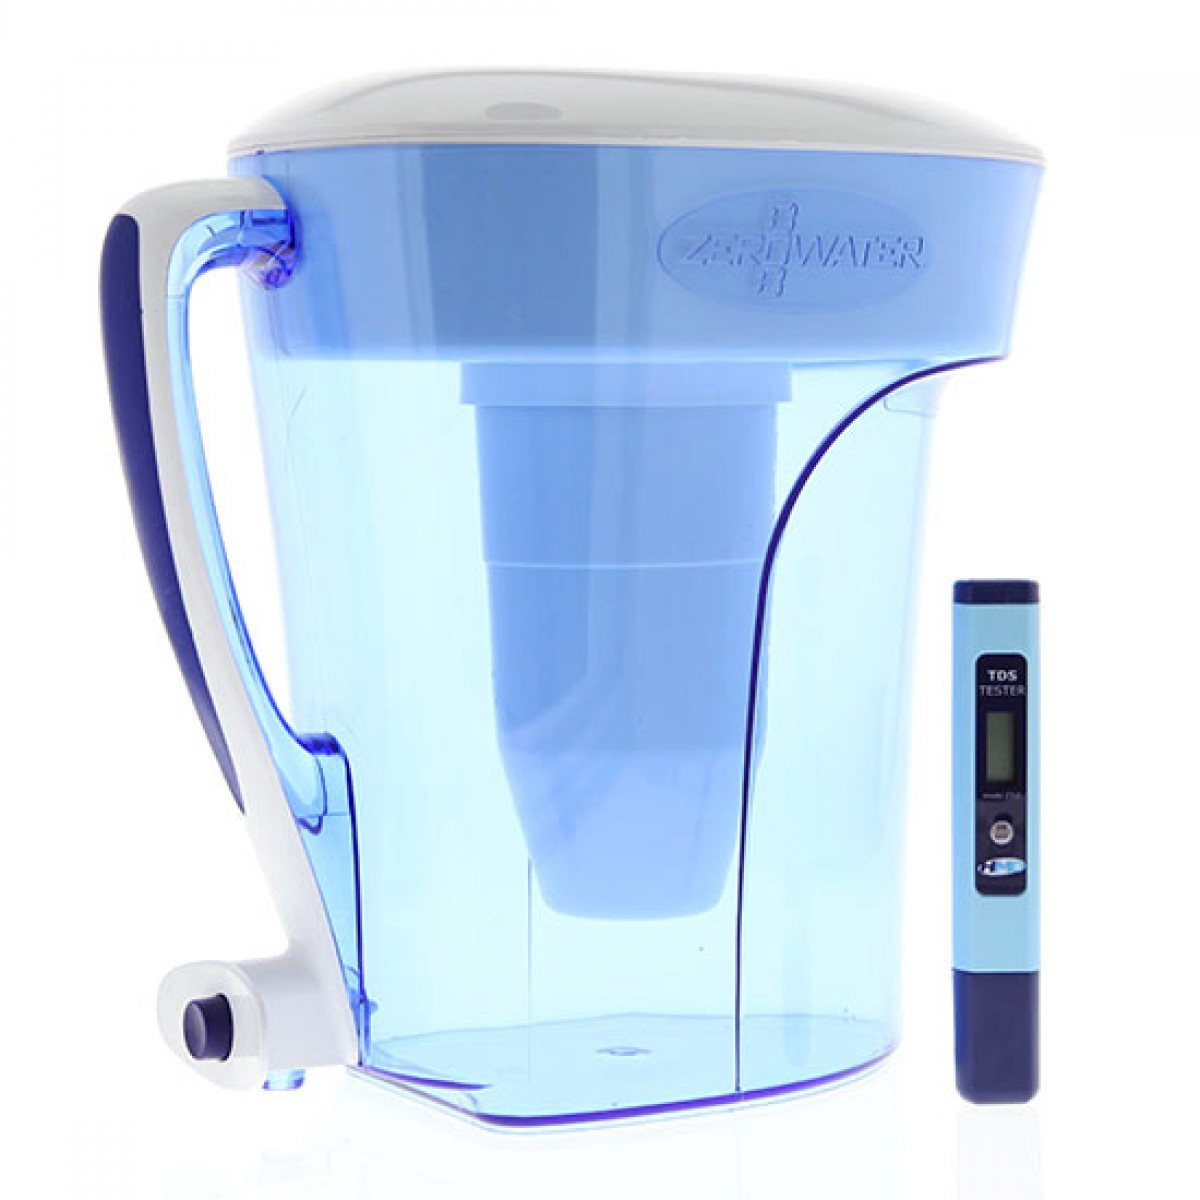 Zd 010 Zerowater Water Filter Pitcher Discountfilterstore inside sizing 1200 X 1200